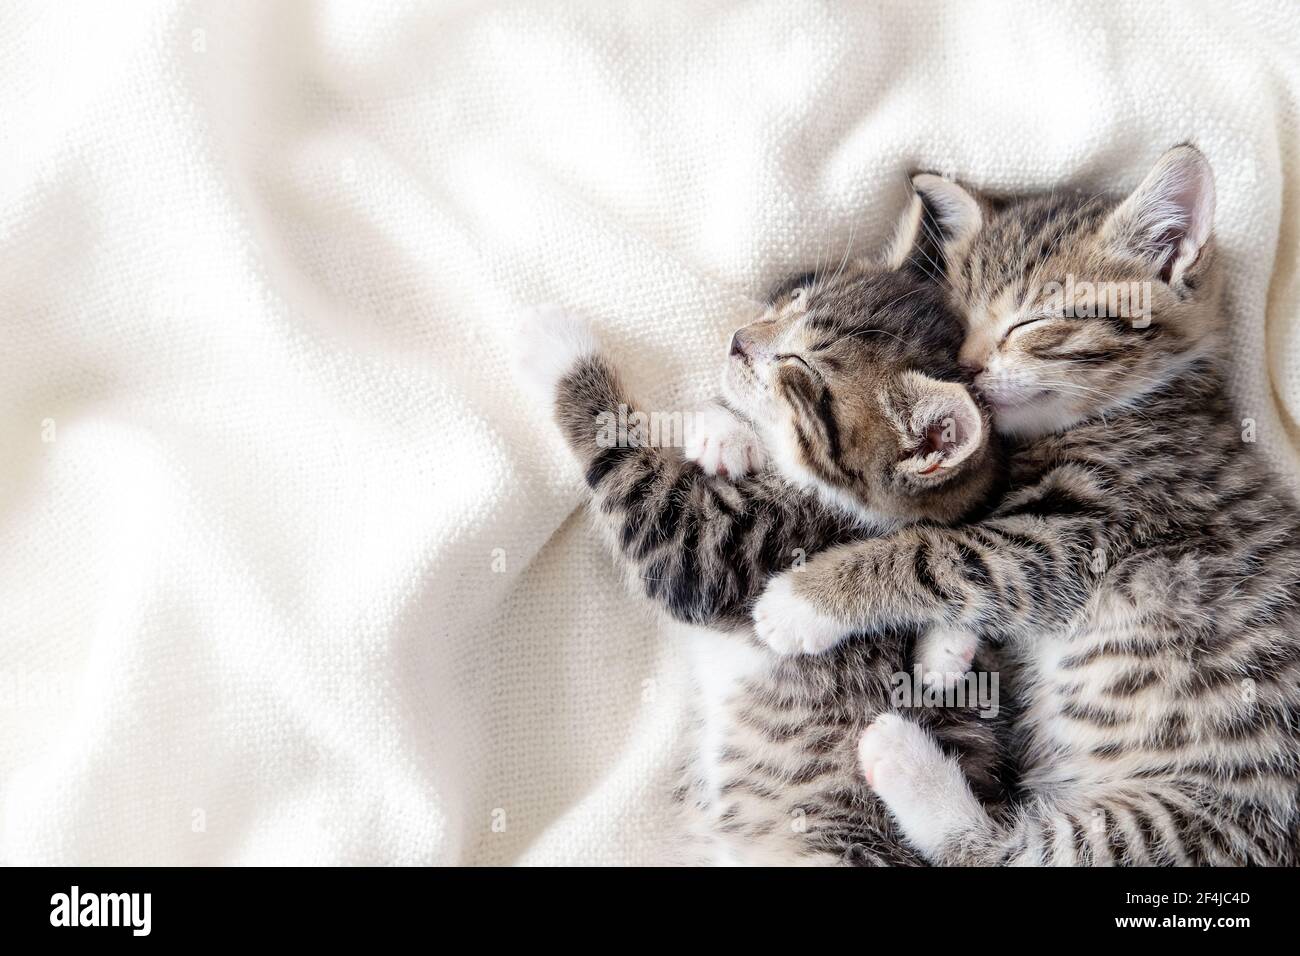 Two small striped domestic kittens sleeping hugging each other at ...